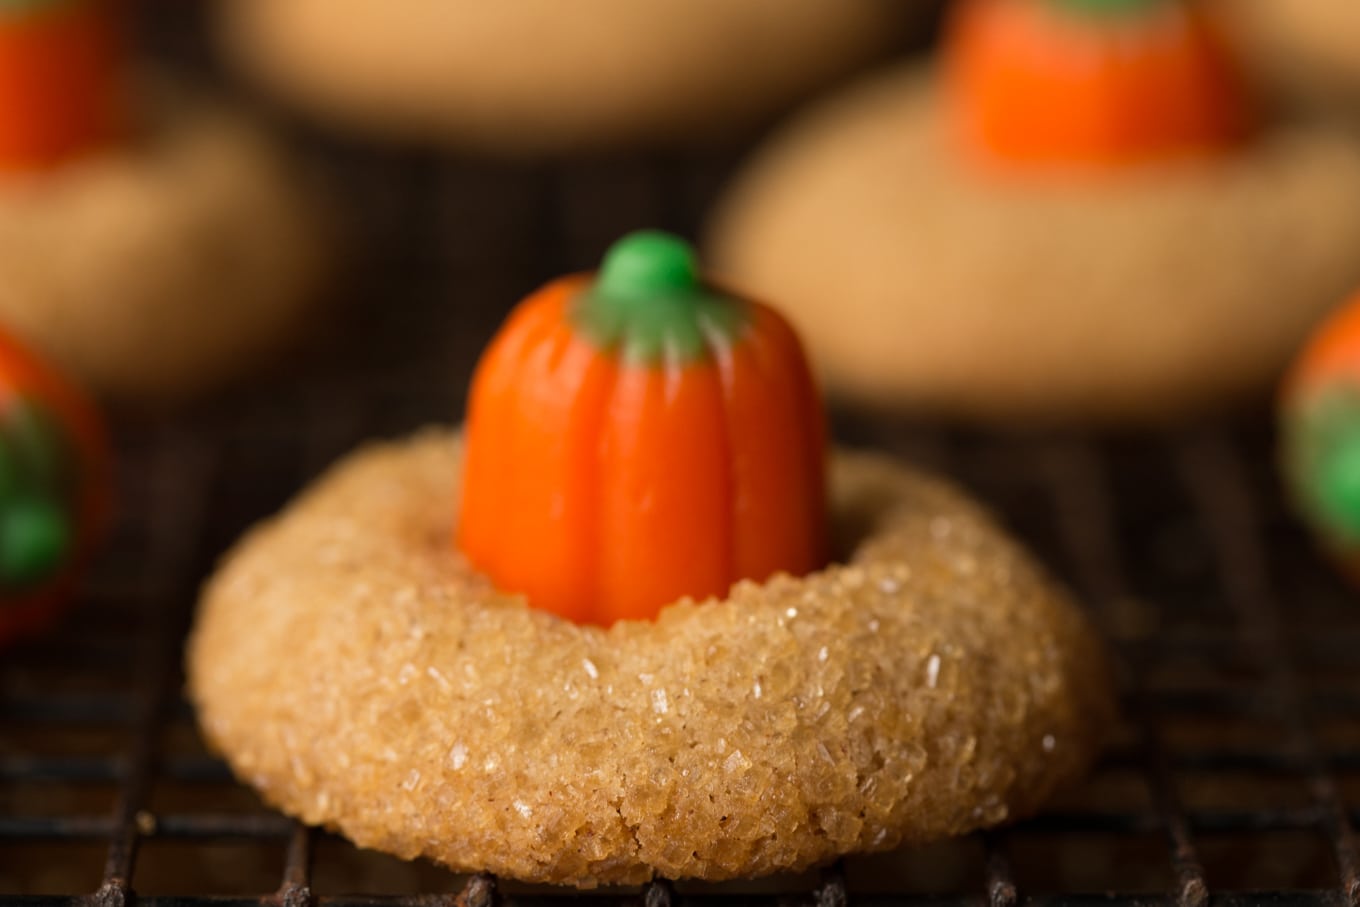 Need a delicious, sweet snack for an autumn party or a Halloween celebration? These Pumpkin Shortbread Cookies are the perfect, delicious solution! thecafesucrefarine.com